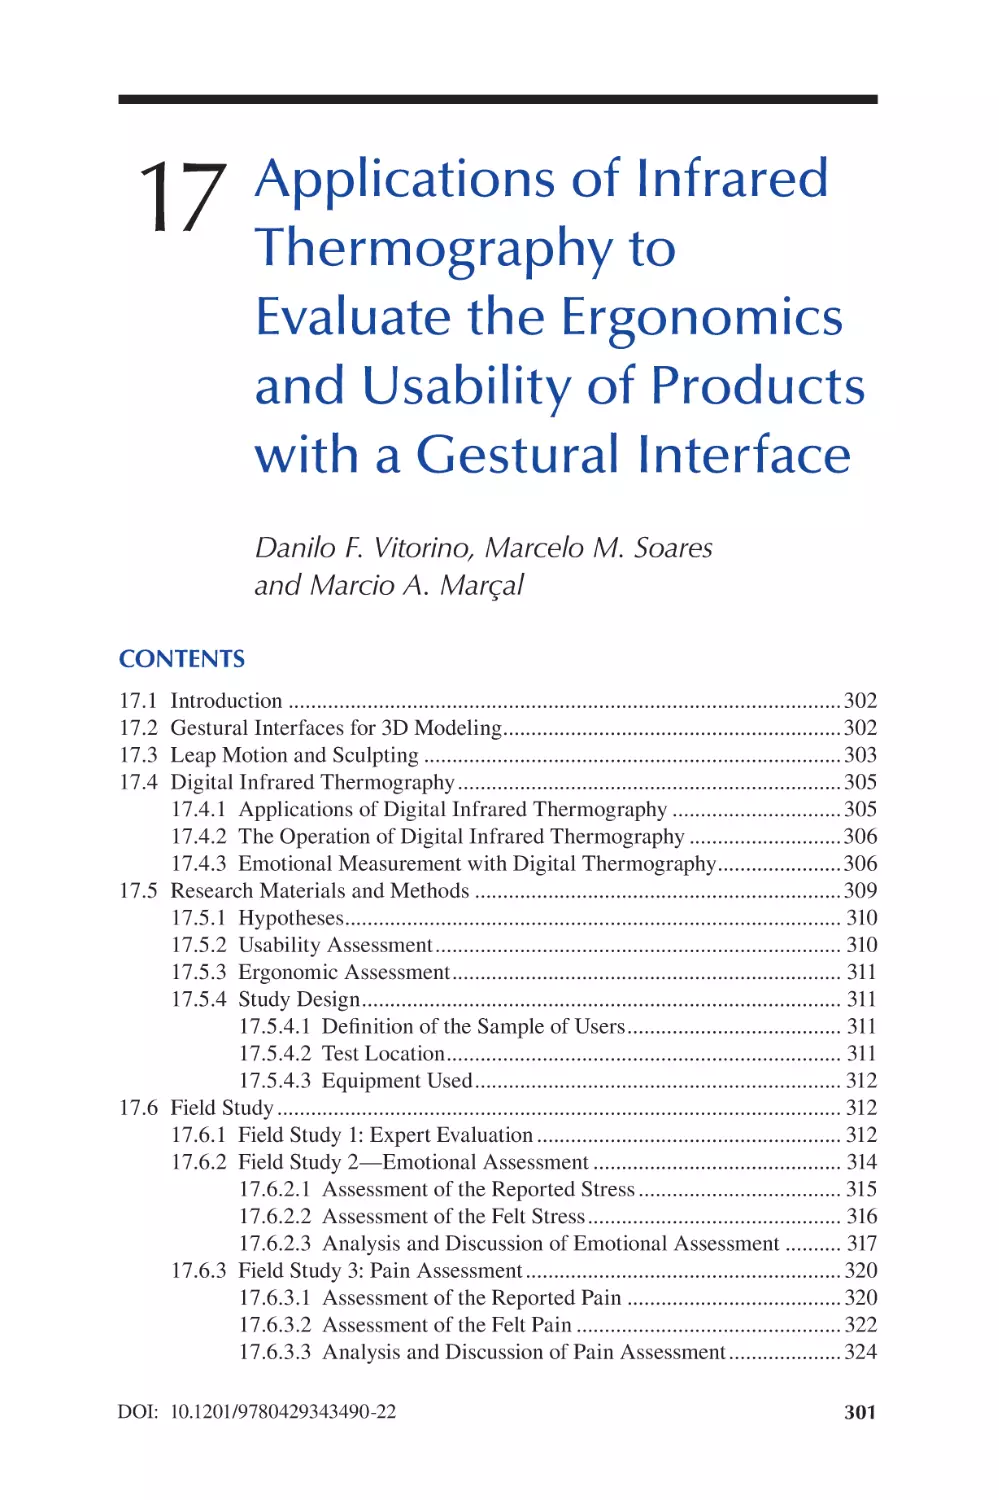 Chapter 17 Applications of Infrared Thermography to Evaluate the Ergonomics and Usability of Products with a Gestural Interface